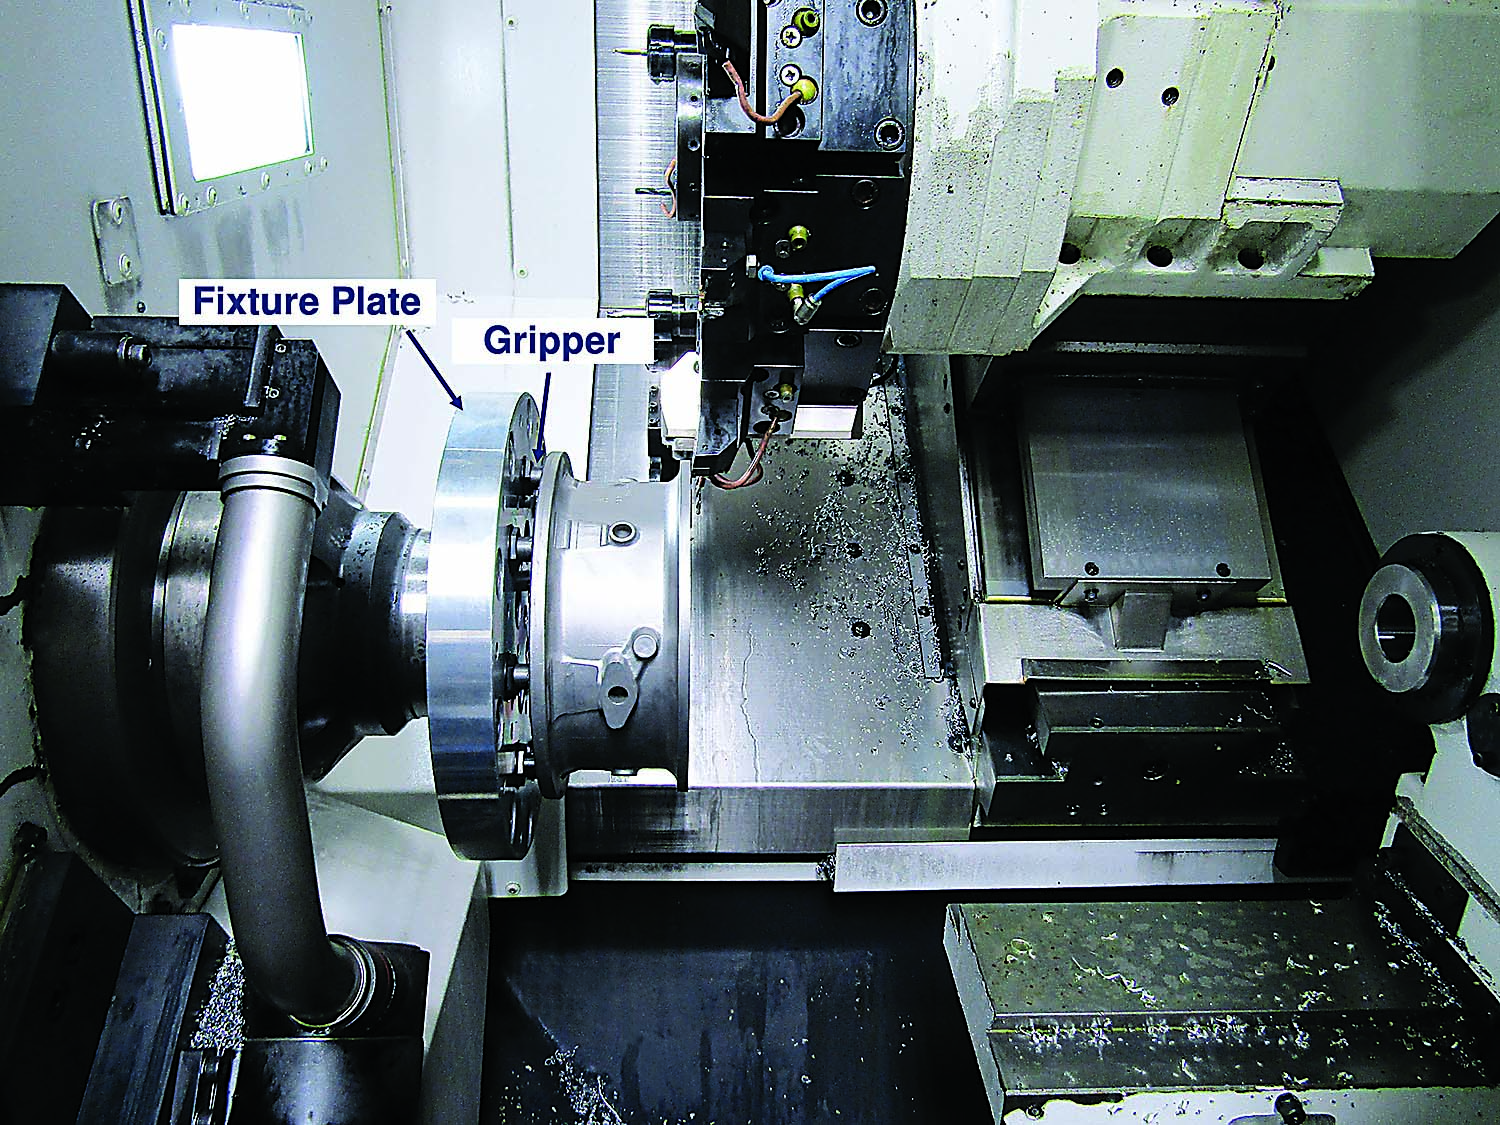 The photo-curable adhesive and patented gripper system is strong enough for a variety of machining applications. Photo credit: Blue Photon Technology and Workholding Systems